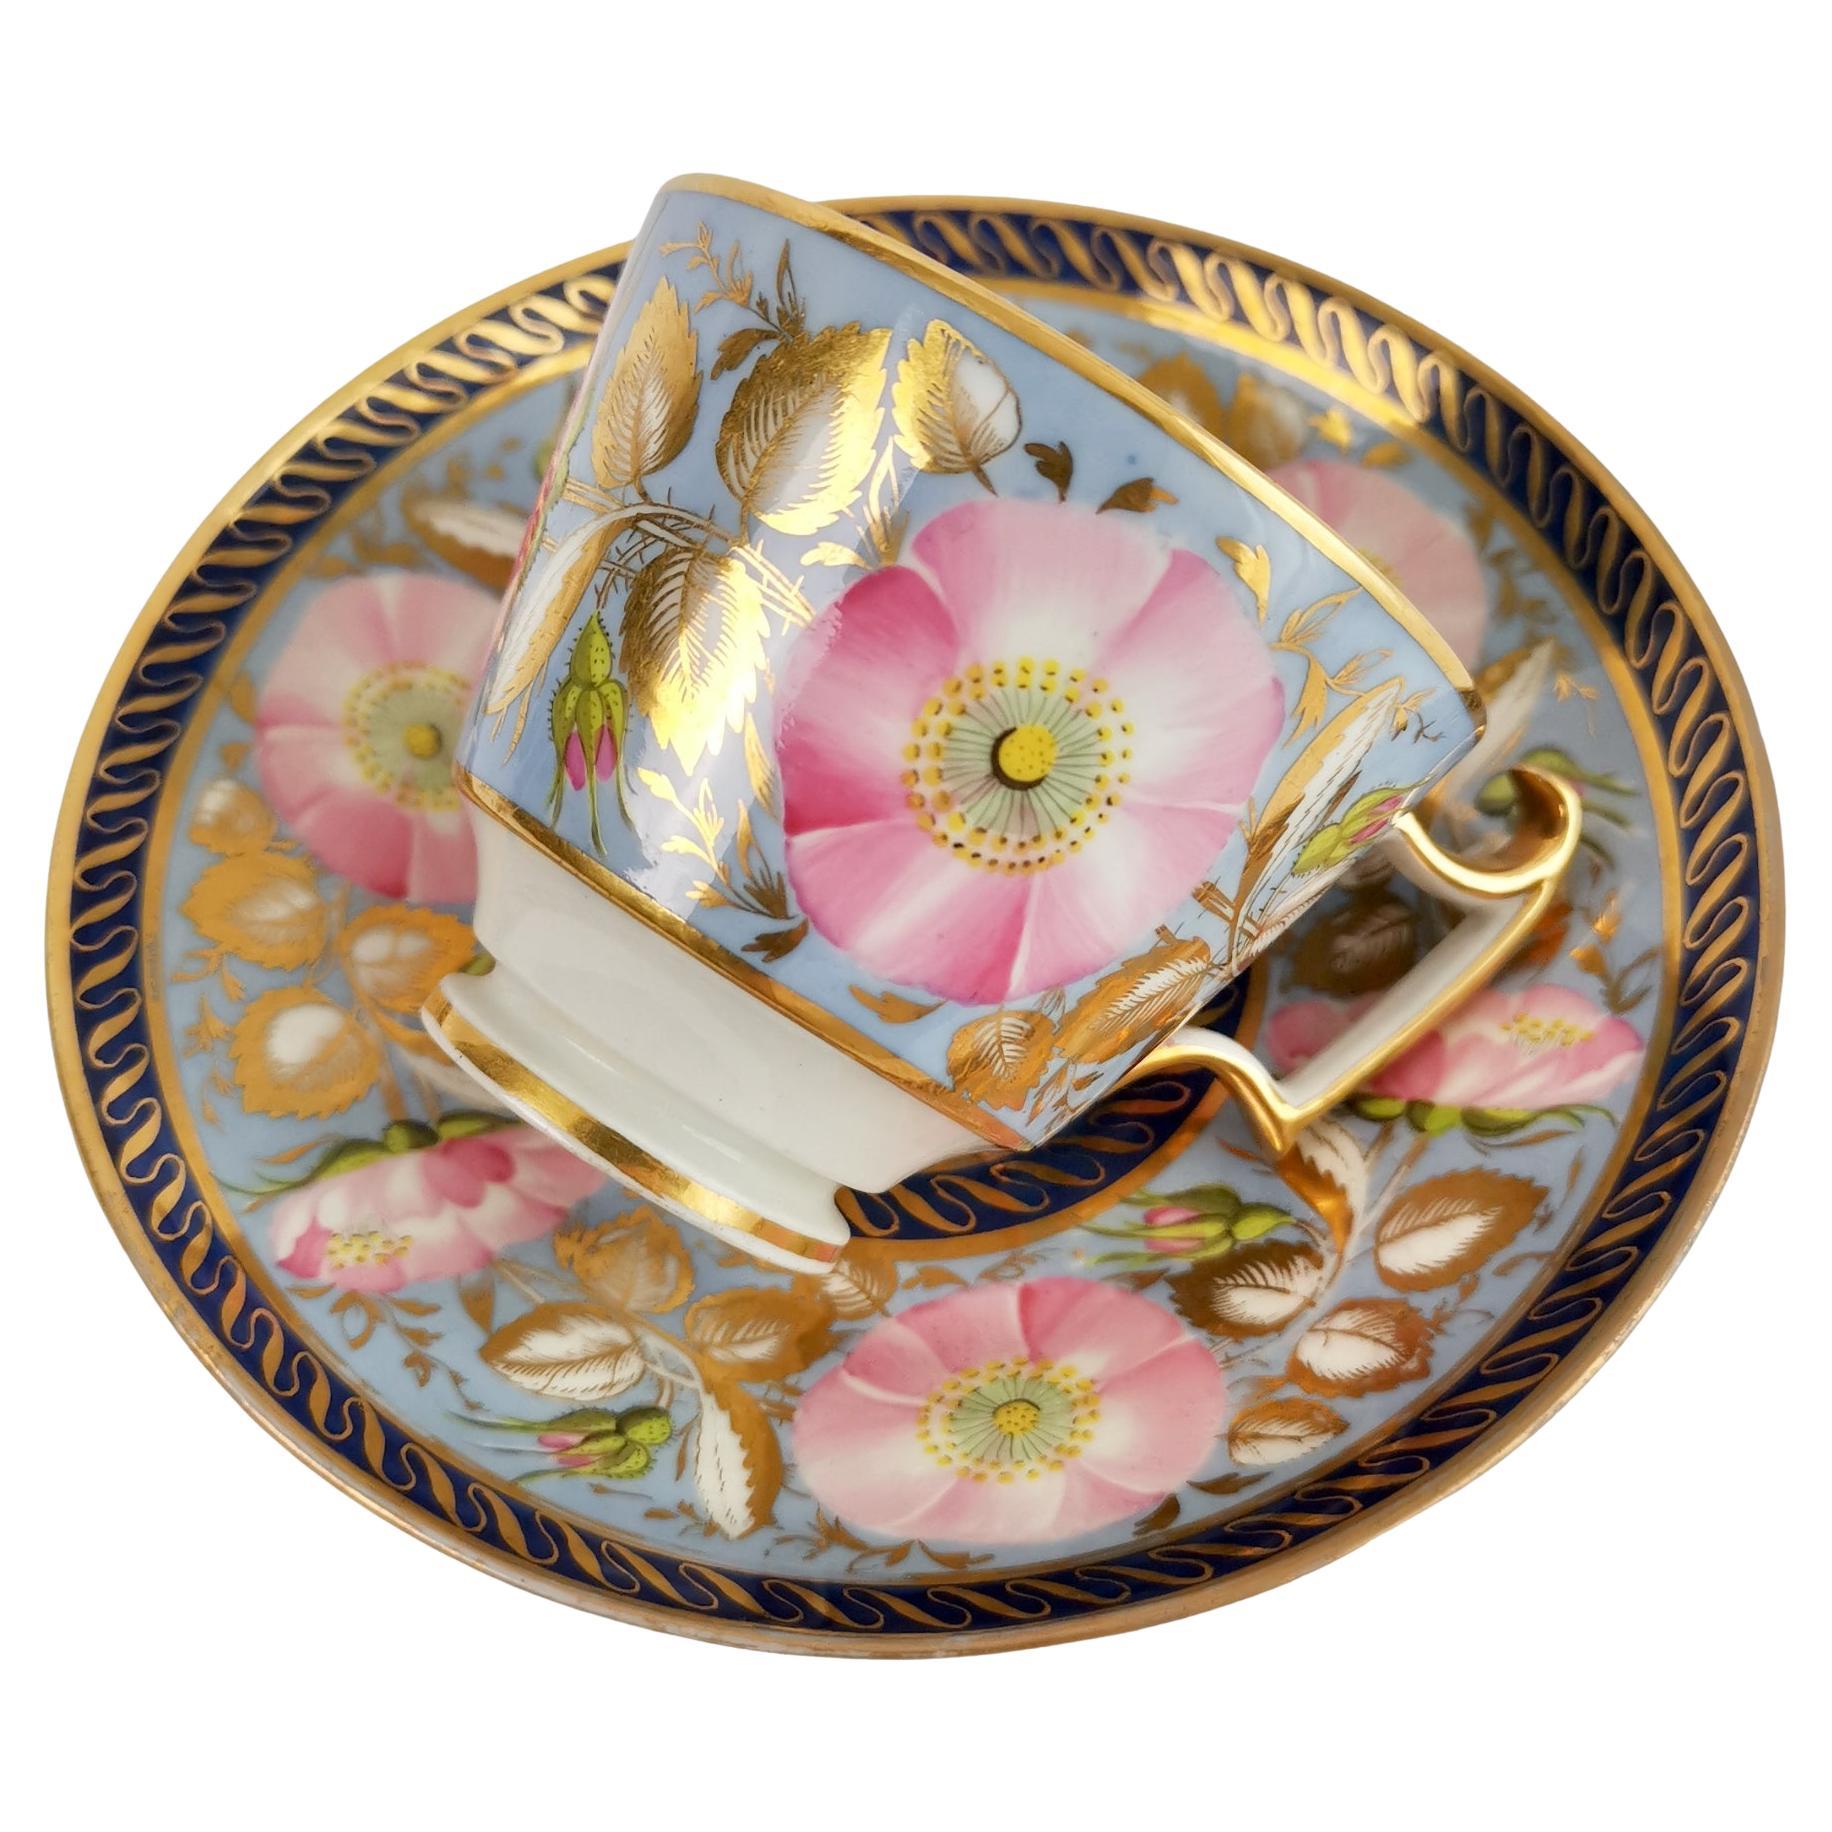 Anstice Horton & Rose Coffee Cup, Periwinkle and Pink Roses, Regency ca 1812